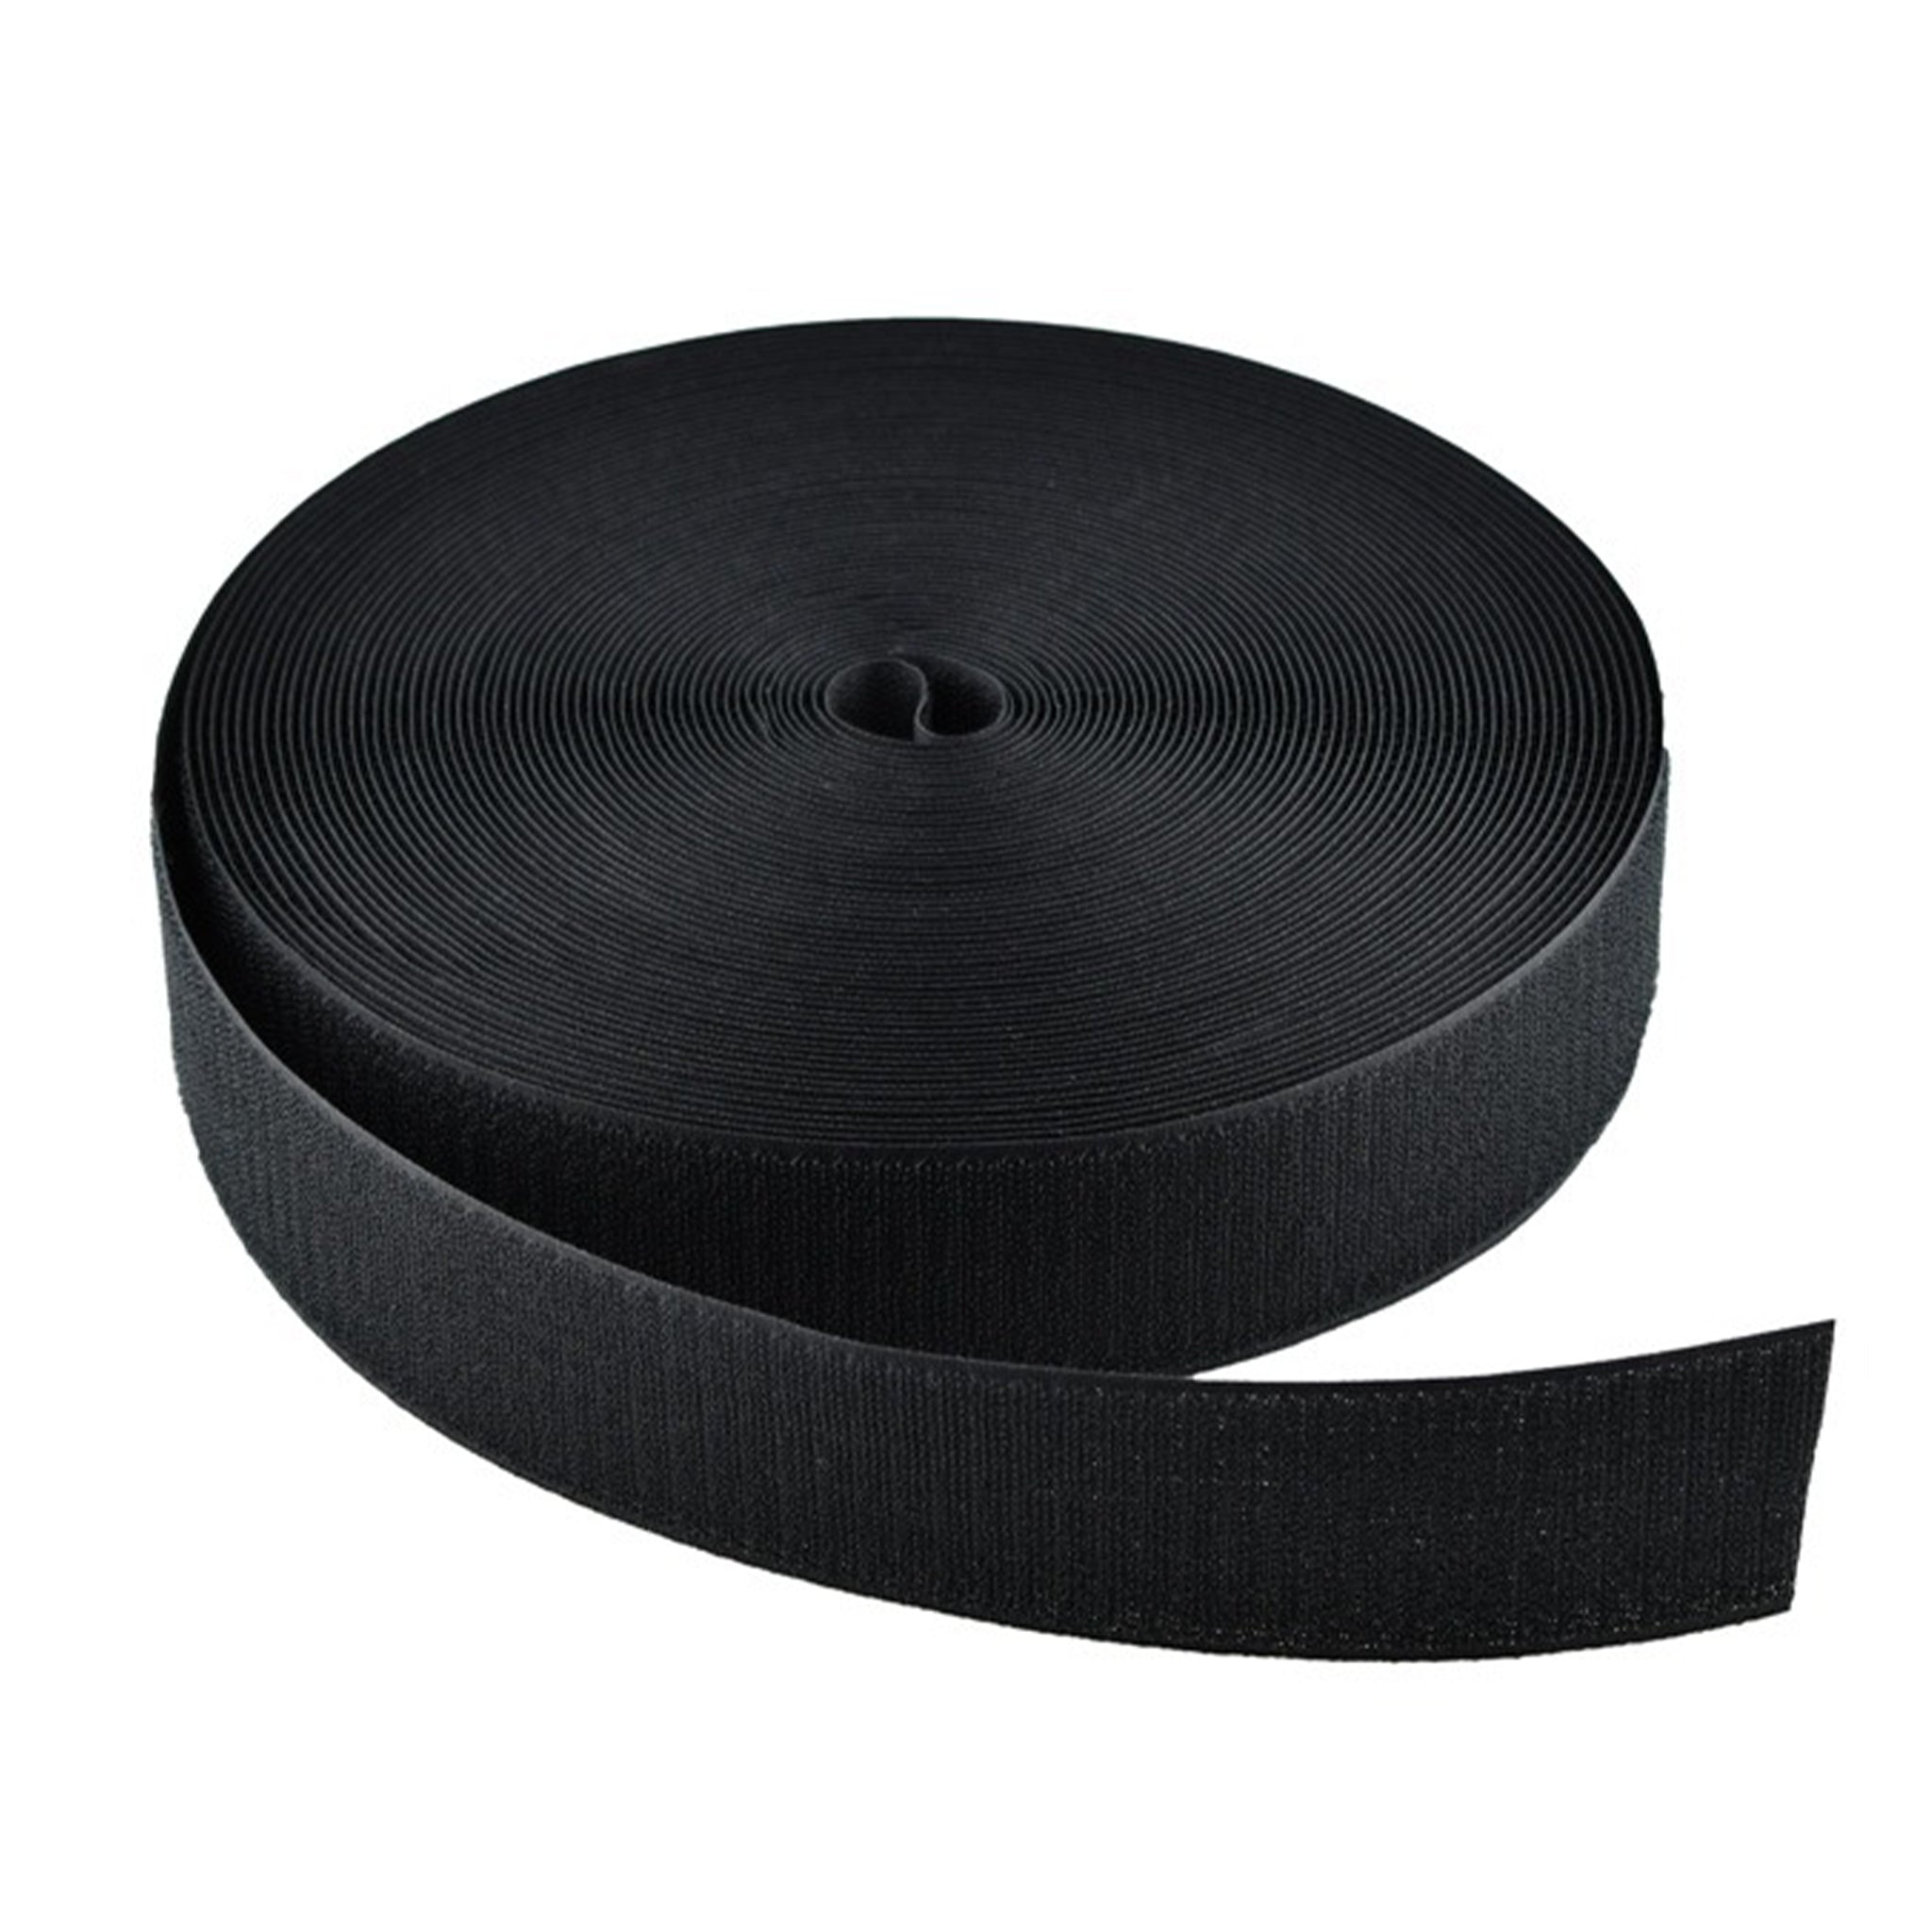 Velcro Tape Sew-on (Hook and Loop) 2 inch – Tarps & Tie-Downs